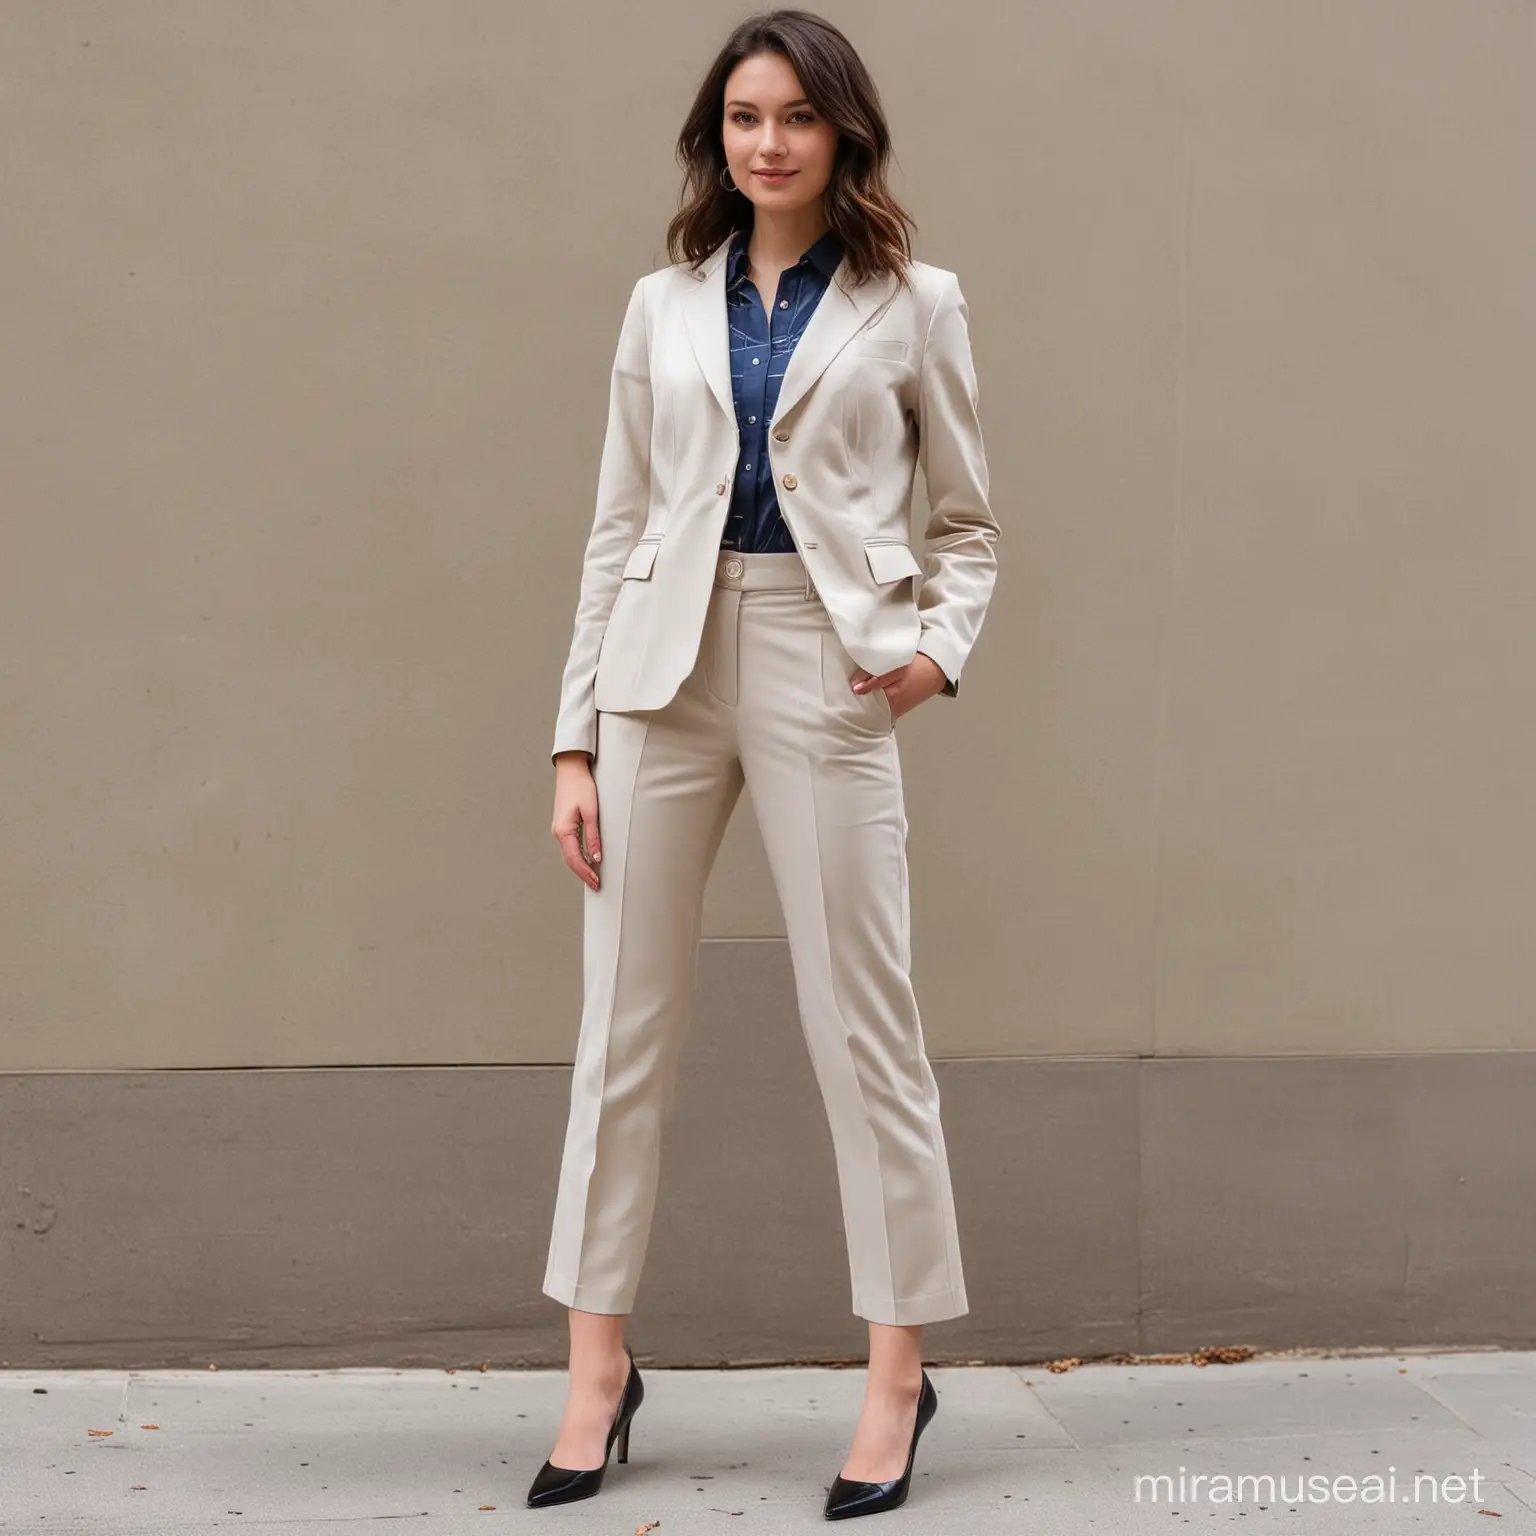 internship outfit for women with button-down blouse and a structured blazer and tailored trouser with low-heeled pumps